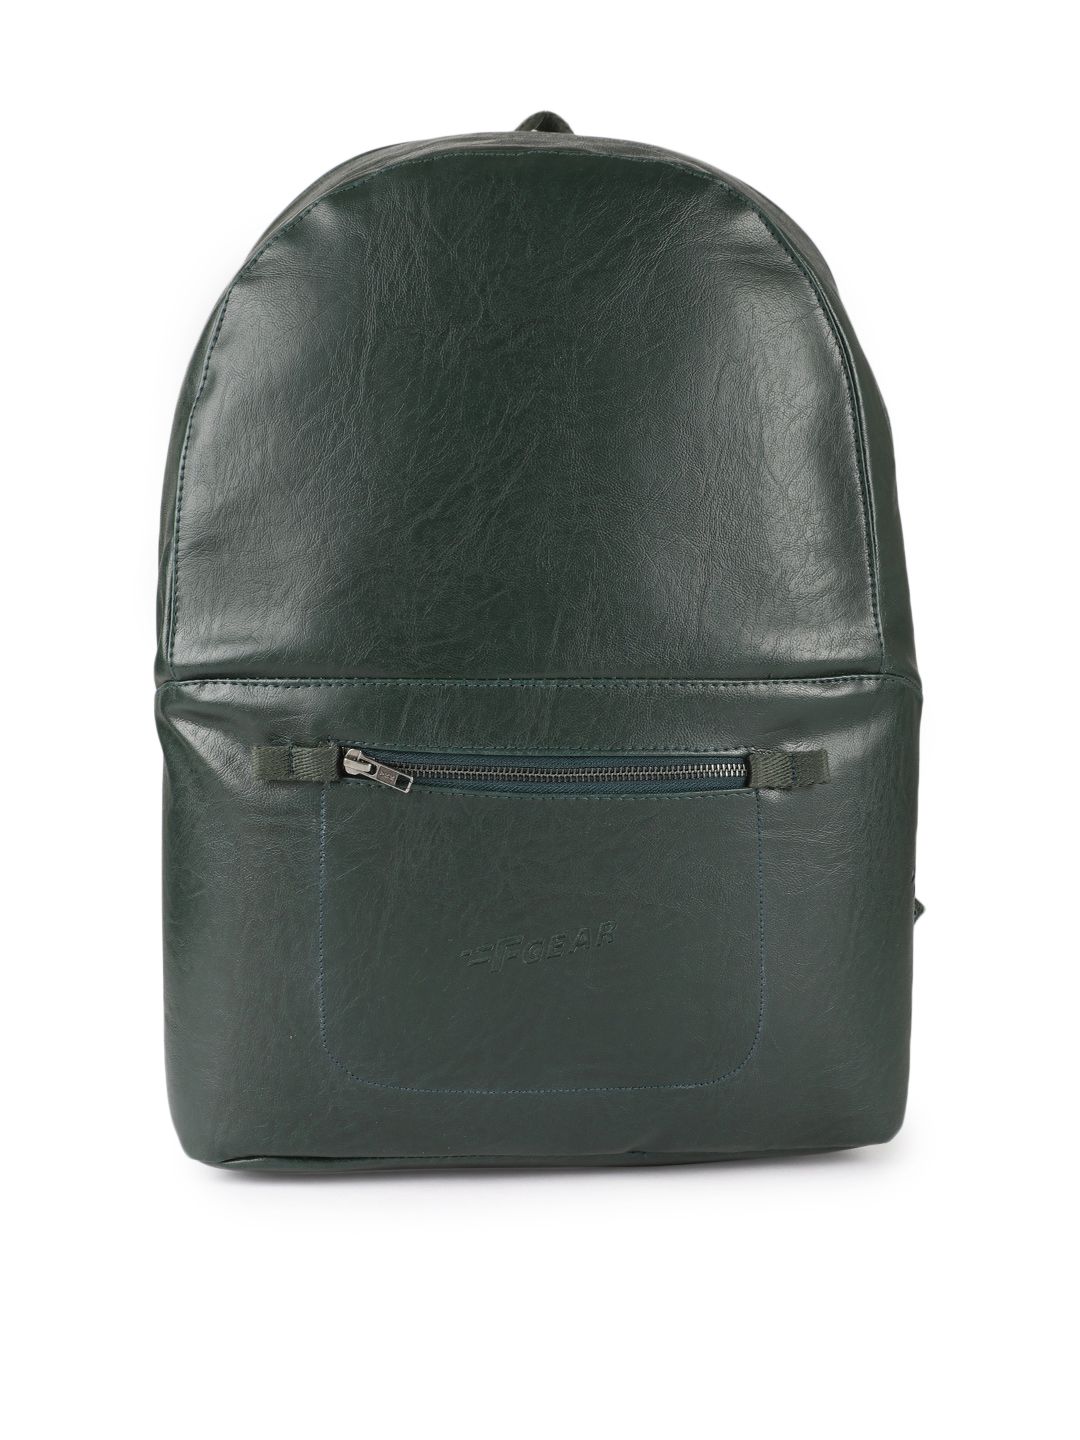 F Gear Unisex Green Solid Backpack Price in India